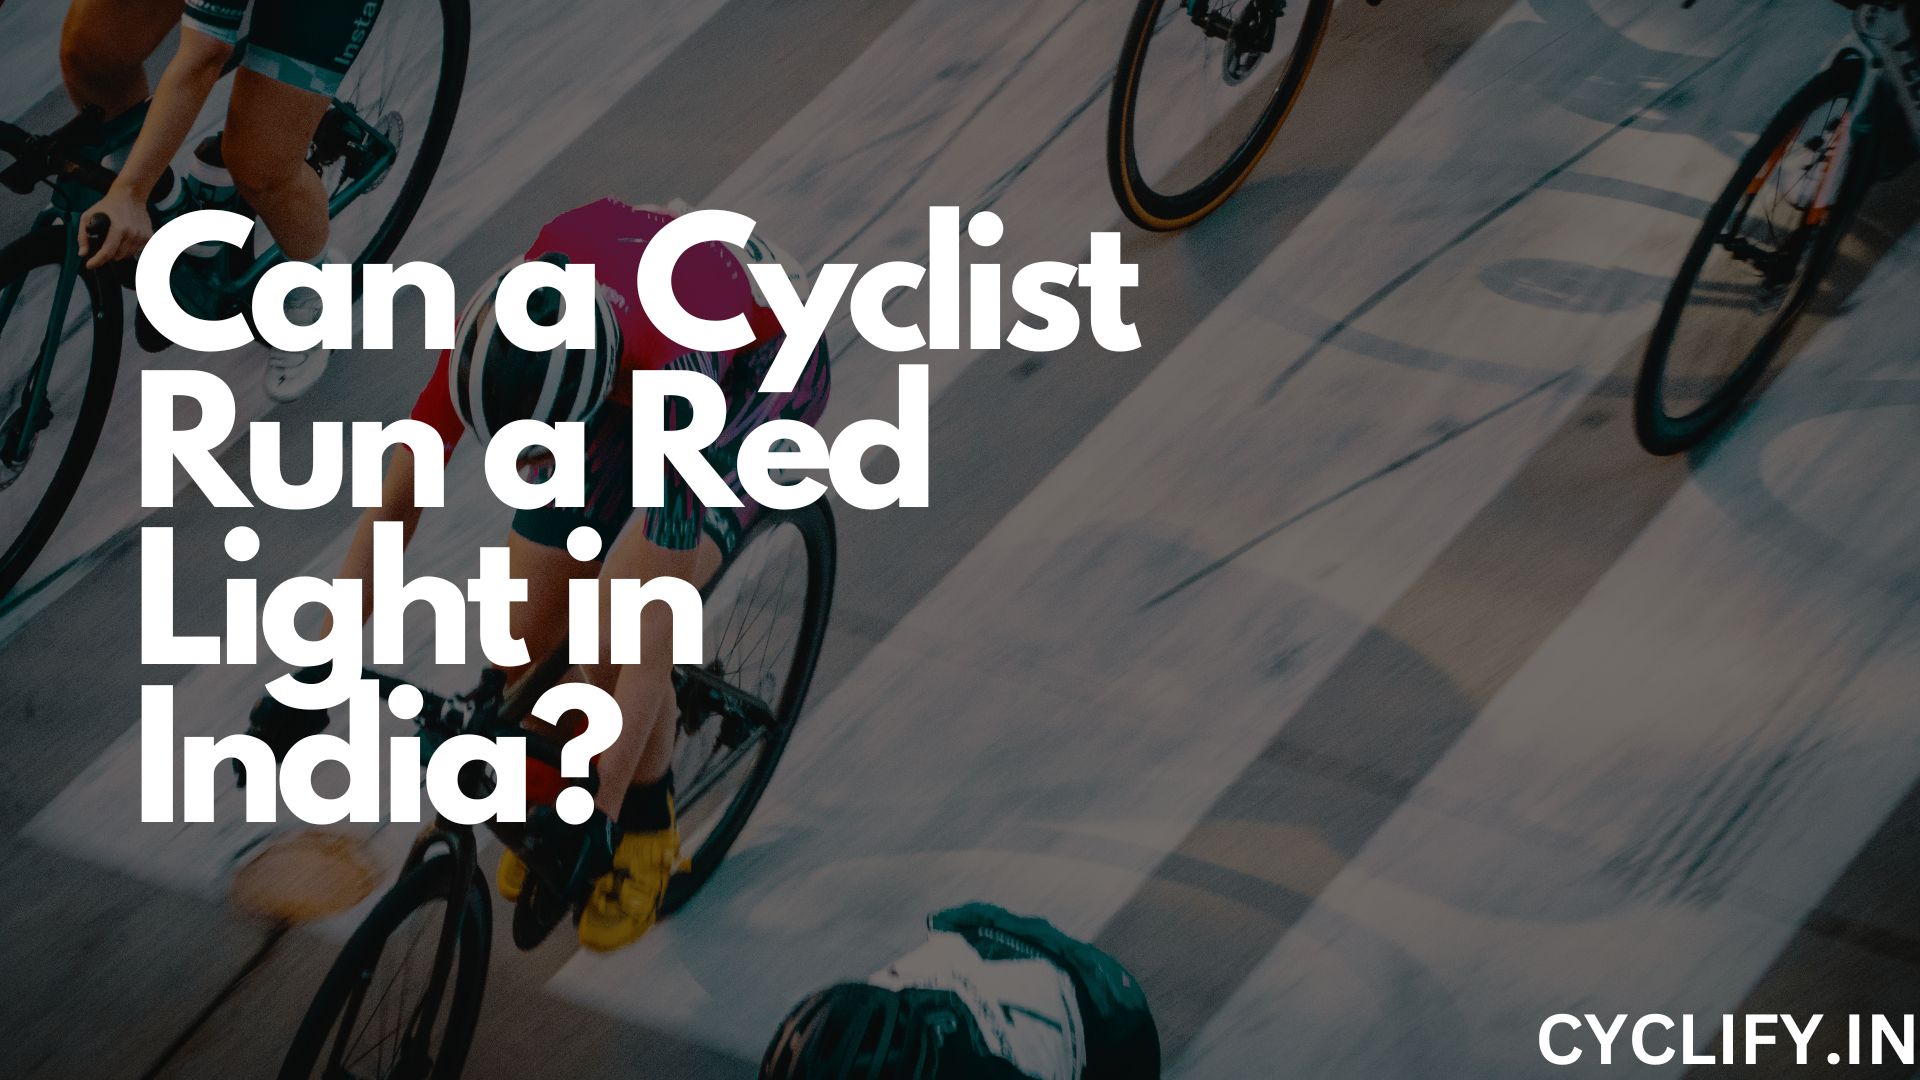 Can a Cyclist Run a Red Light in India?